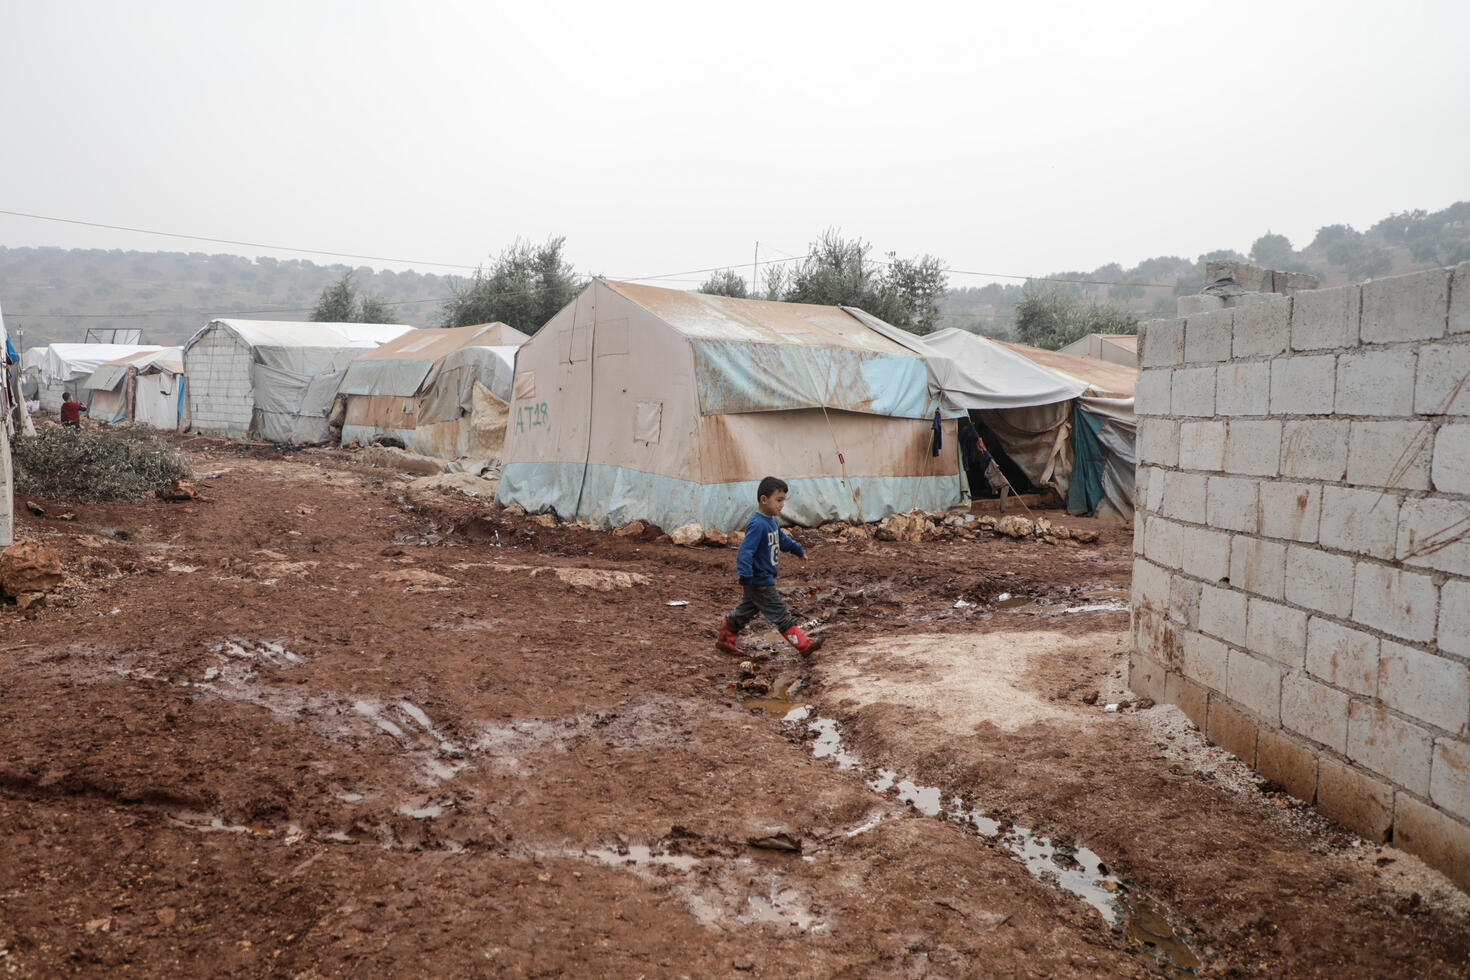 A Syrian boy walks through the mud past tents for displaced families in Idlib, where the IRC provides aid.